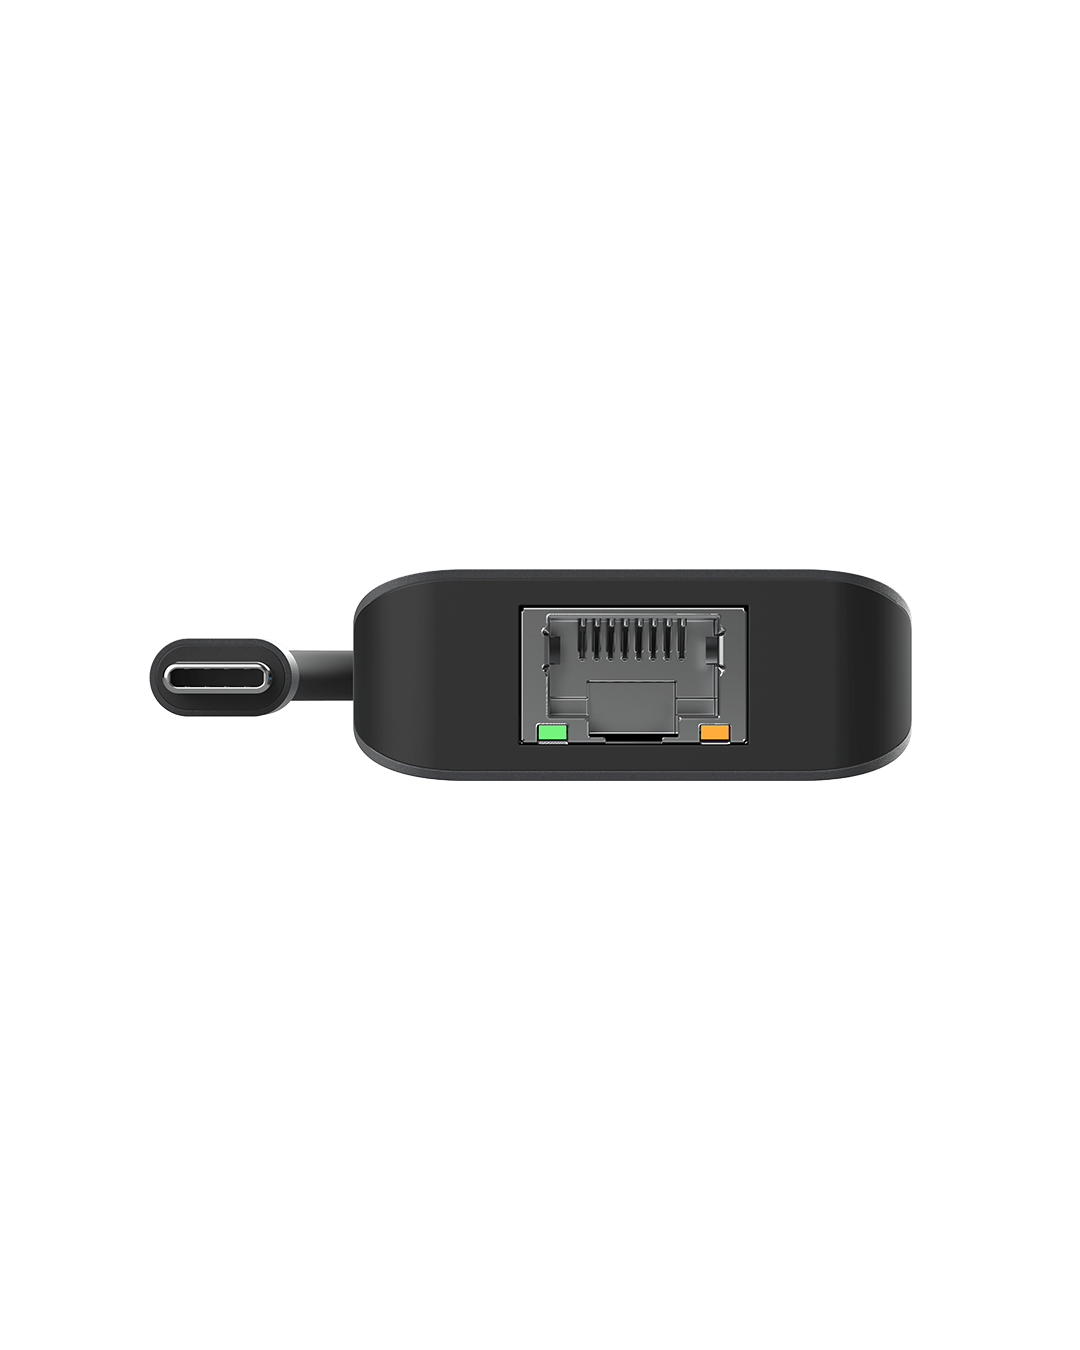 Sitecom - 8 in 1 USB-C Power Delivery Multiport Adapter - CN-5507